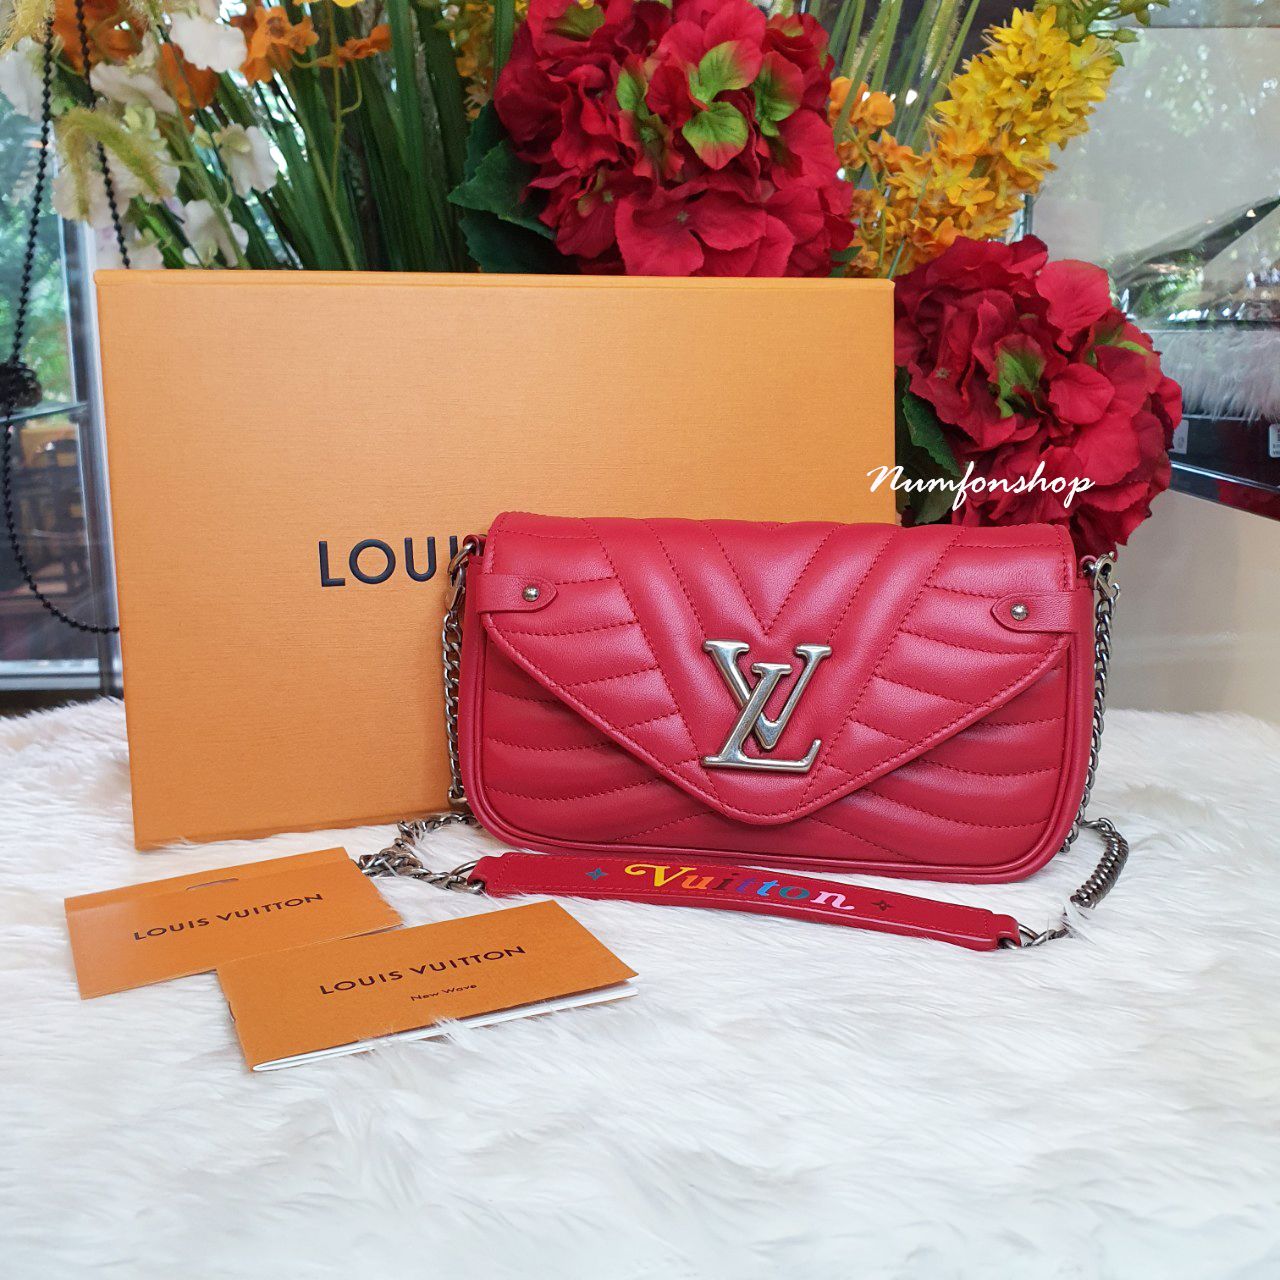 Sold Louis Vuitton Pochette New Wave Like New.